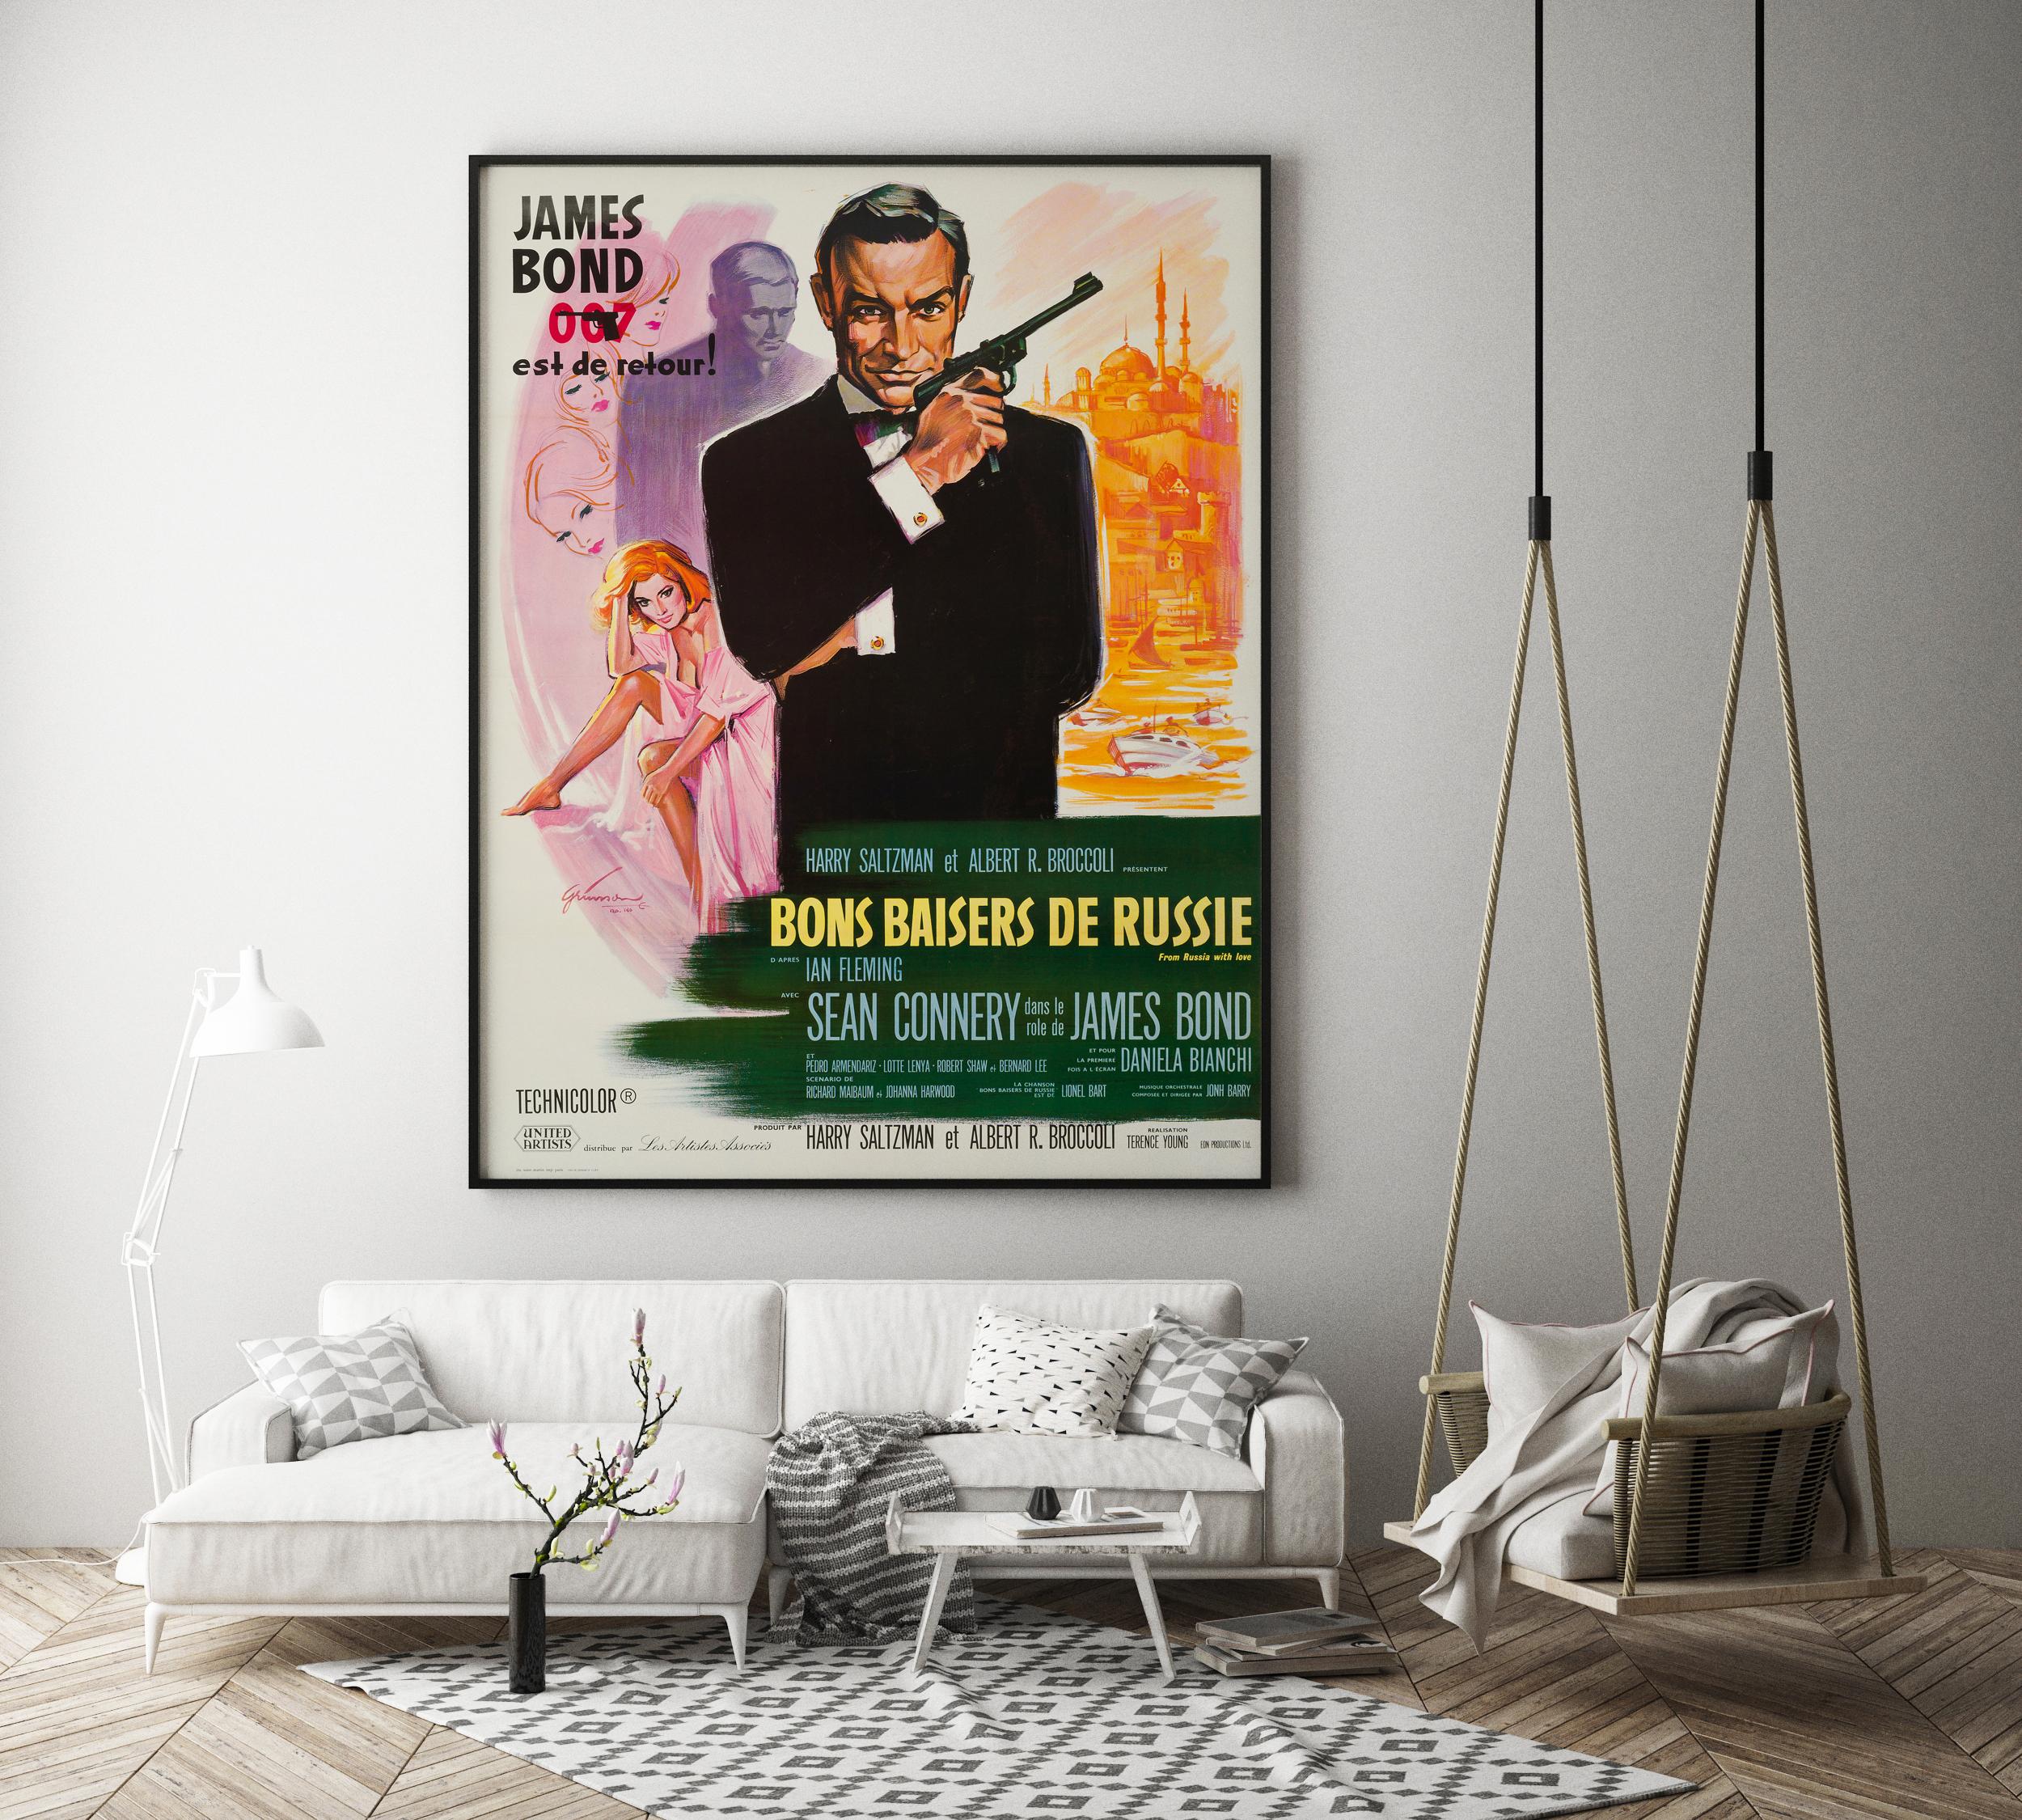 Featured on the cover of James Bond Movie Posters by Tony Nourmand and widely regarded as one of the most beautiful posters ever designed for a James Bond film, Boris Grinsson's stunning painterly artwork for the French release of 